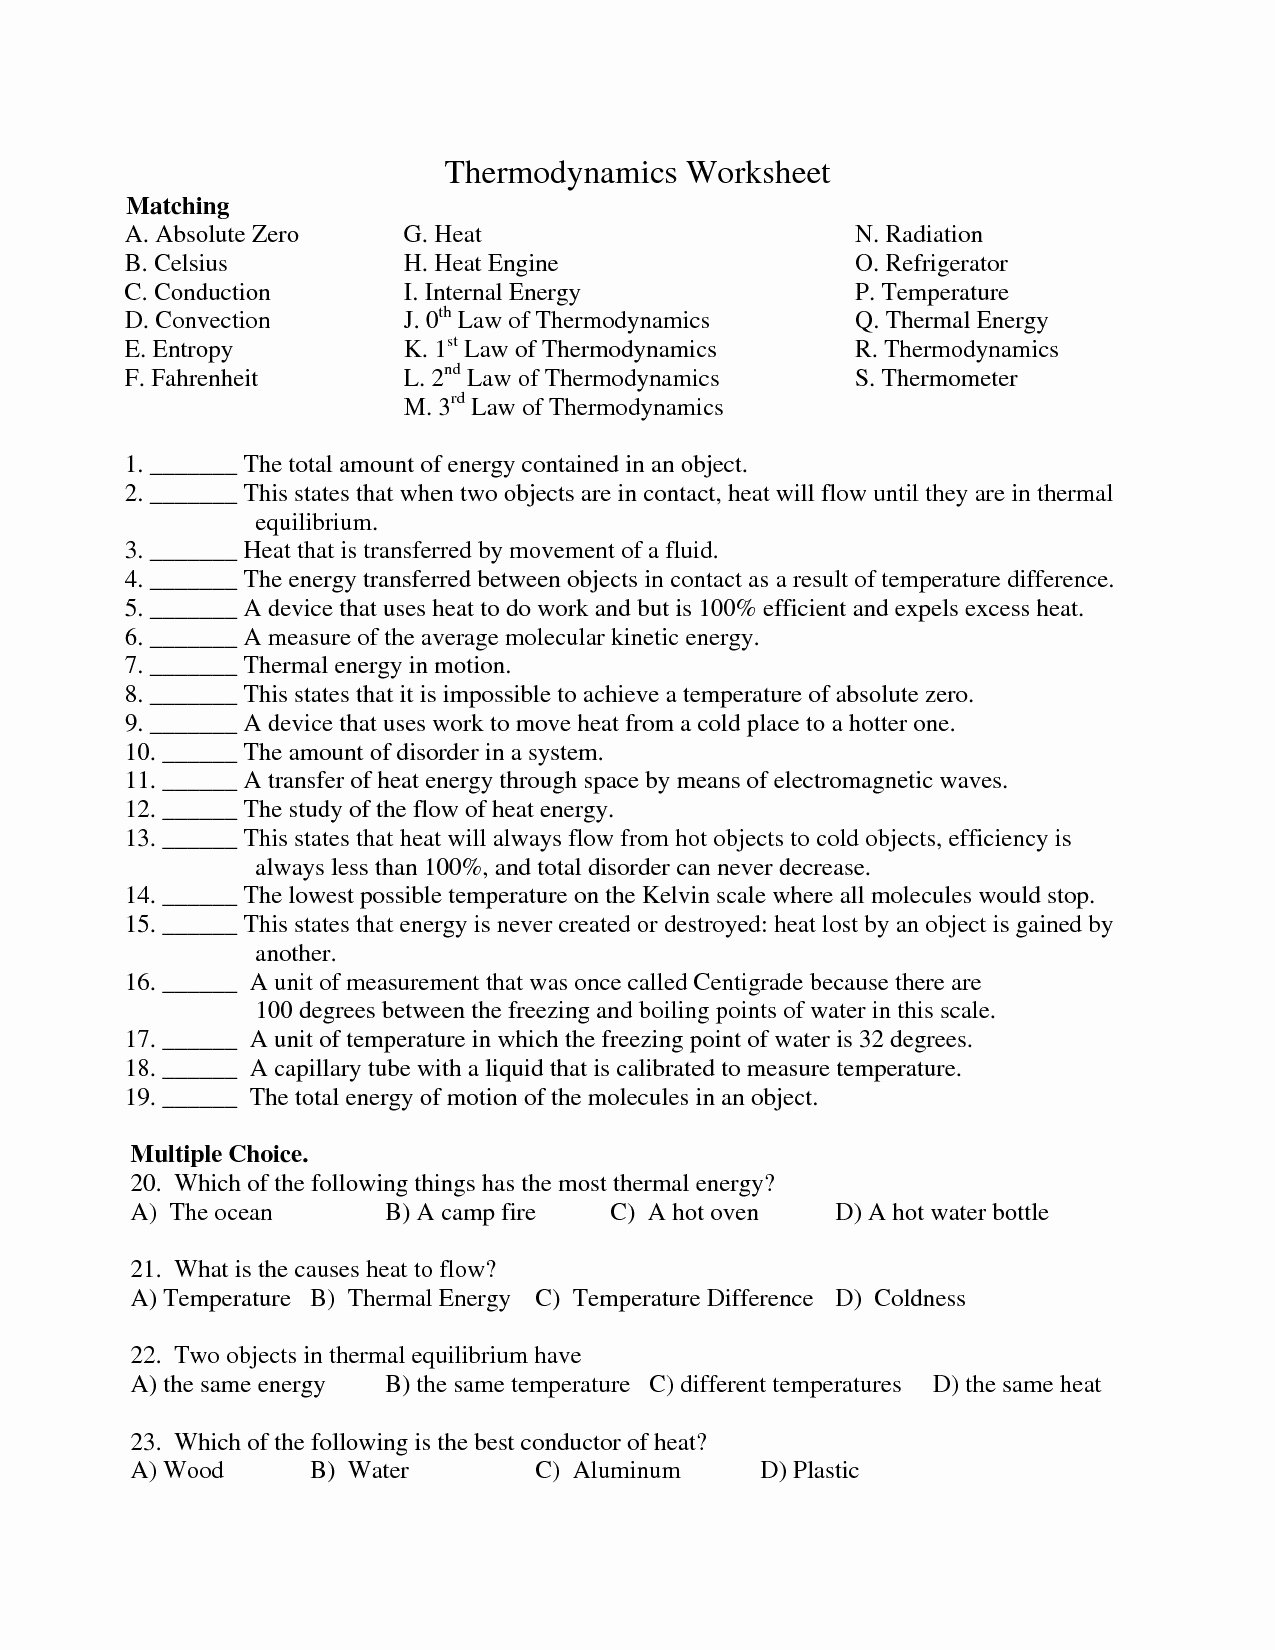 Bill Nye Energy Worksheet Answers Unique Bill Nye Energy Worksheet Answers Energy Etfs